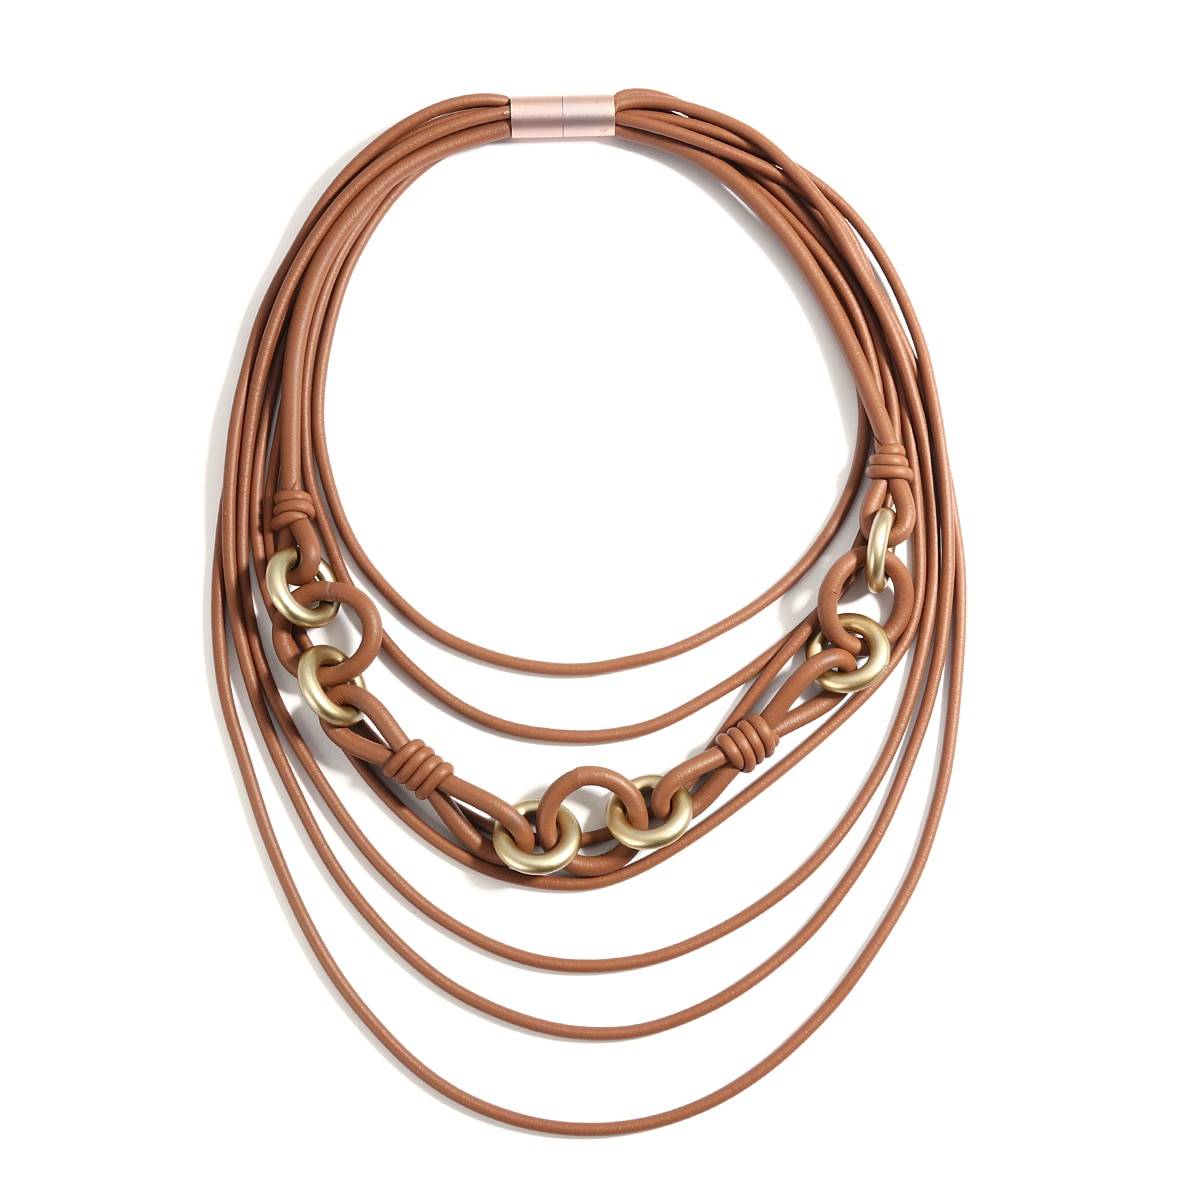 Sunglasses Metal Long Hair Eyelashes Handmade Jewellery Layered Necklace Necklaces Statement Necklace 8d255f28538fbae46aeae7: Brown